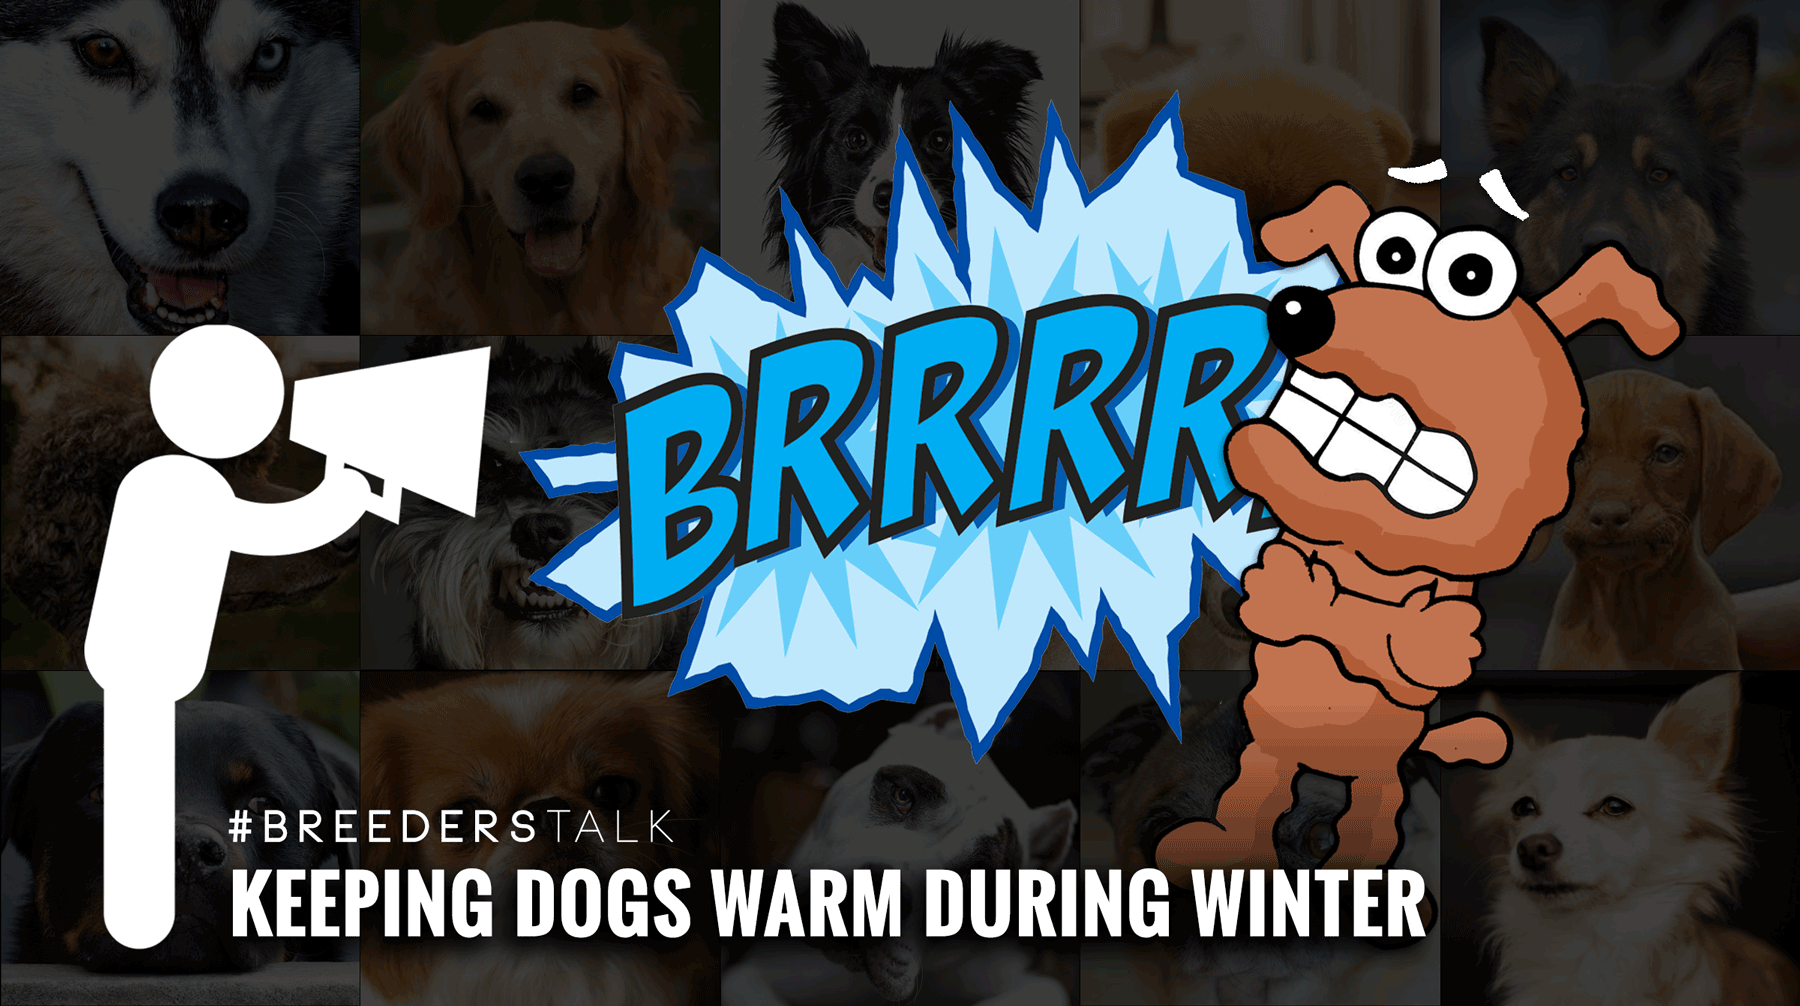 Breeders talk about keeping dogs warm during subzero and coldest days